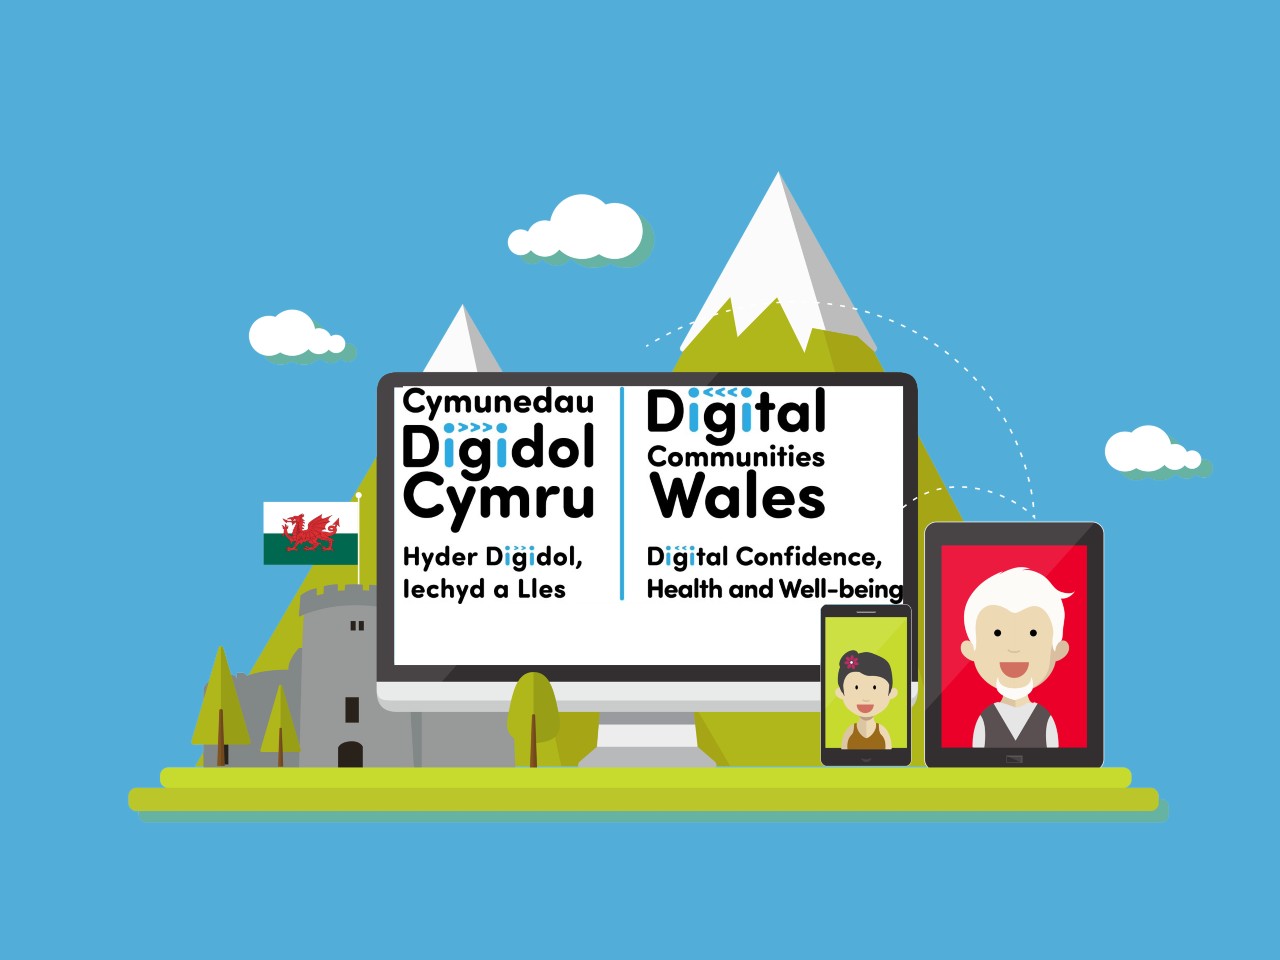 Digital Communities Wales logo with welsh translation Cymunedau Digidol Cymru  - illustration of a mountain in blue skies with a castle and cartoons of happy faces